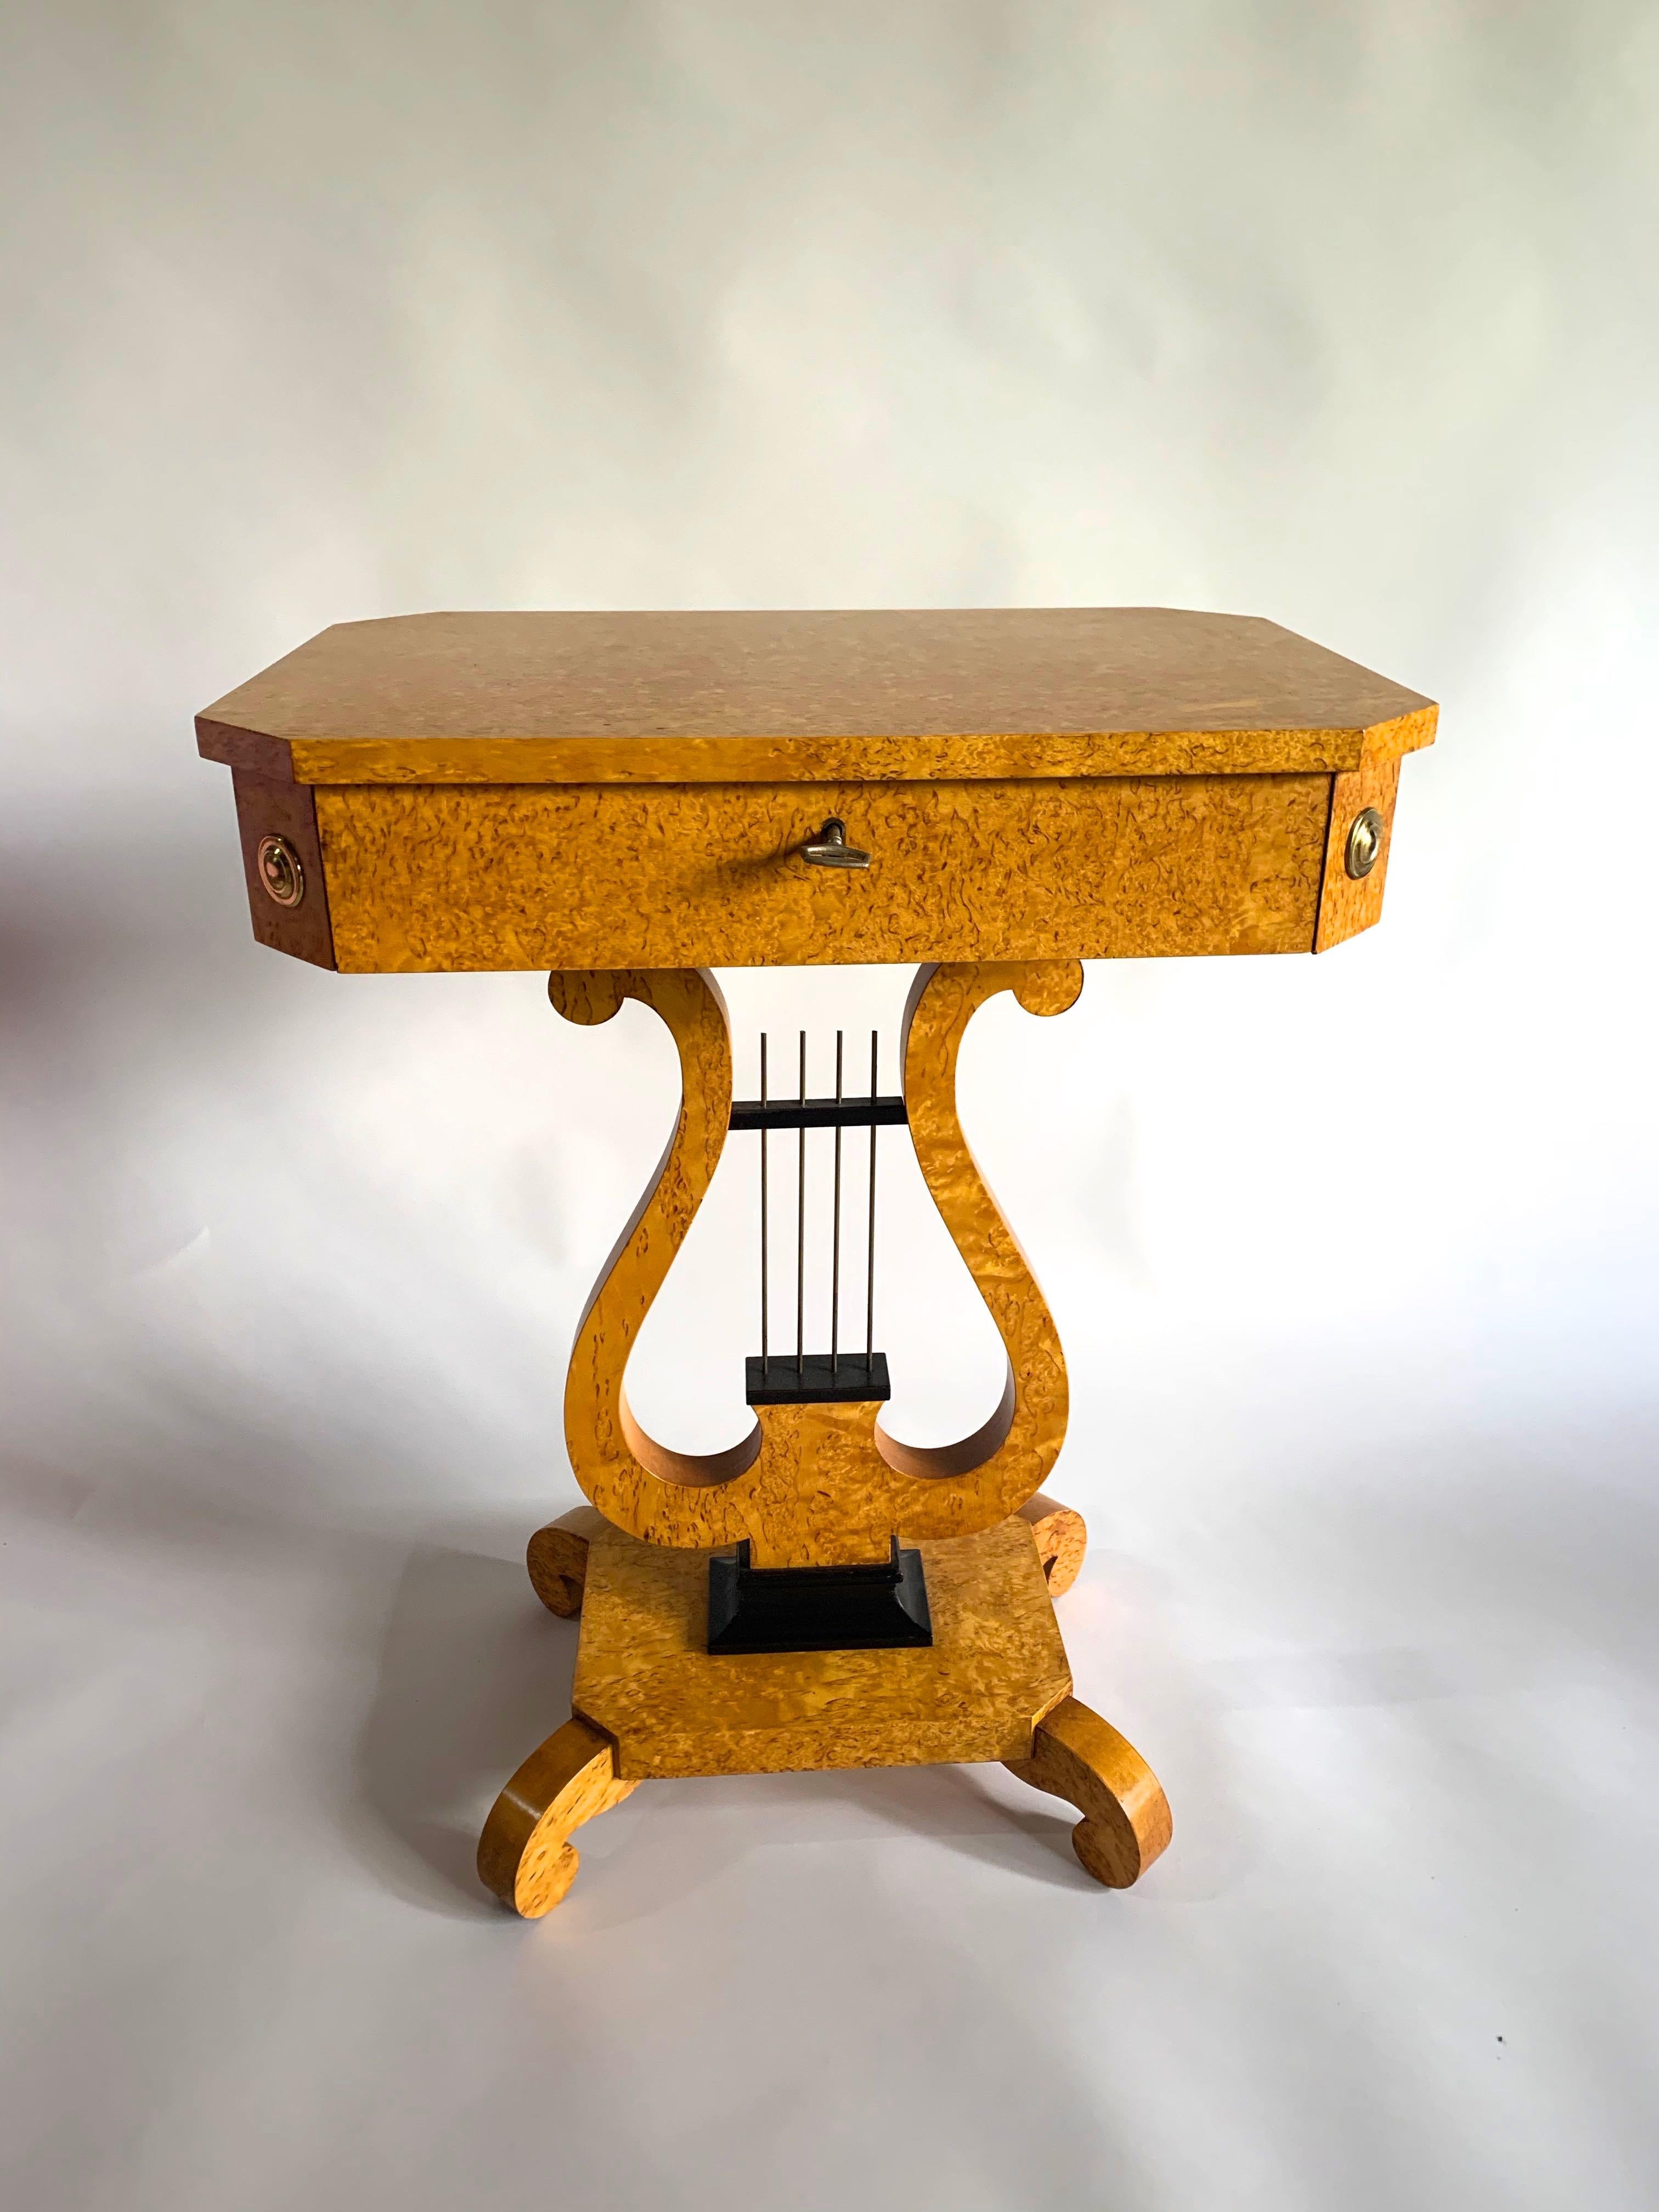 A rare pair of Karelian birch Swedish Lyre sewing tables. The tables have an exceptionally good grain and color to the timber. They are mounted with brass pateries, the central strings of the Lyre are brass.
Ebonized detailing to the base. The